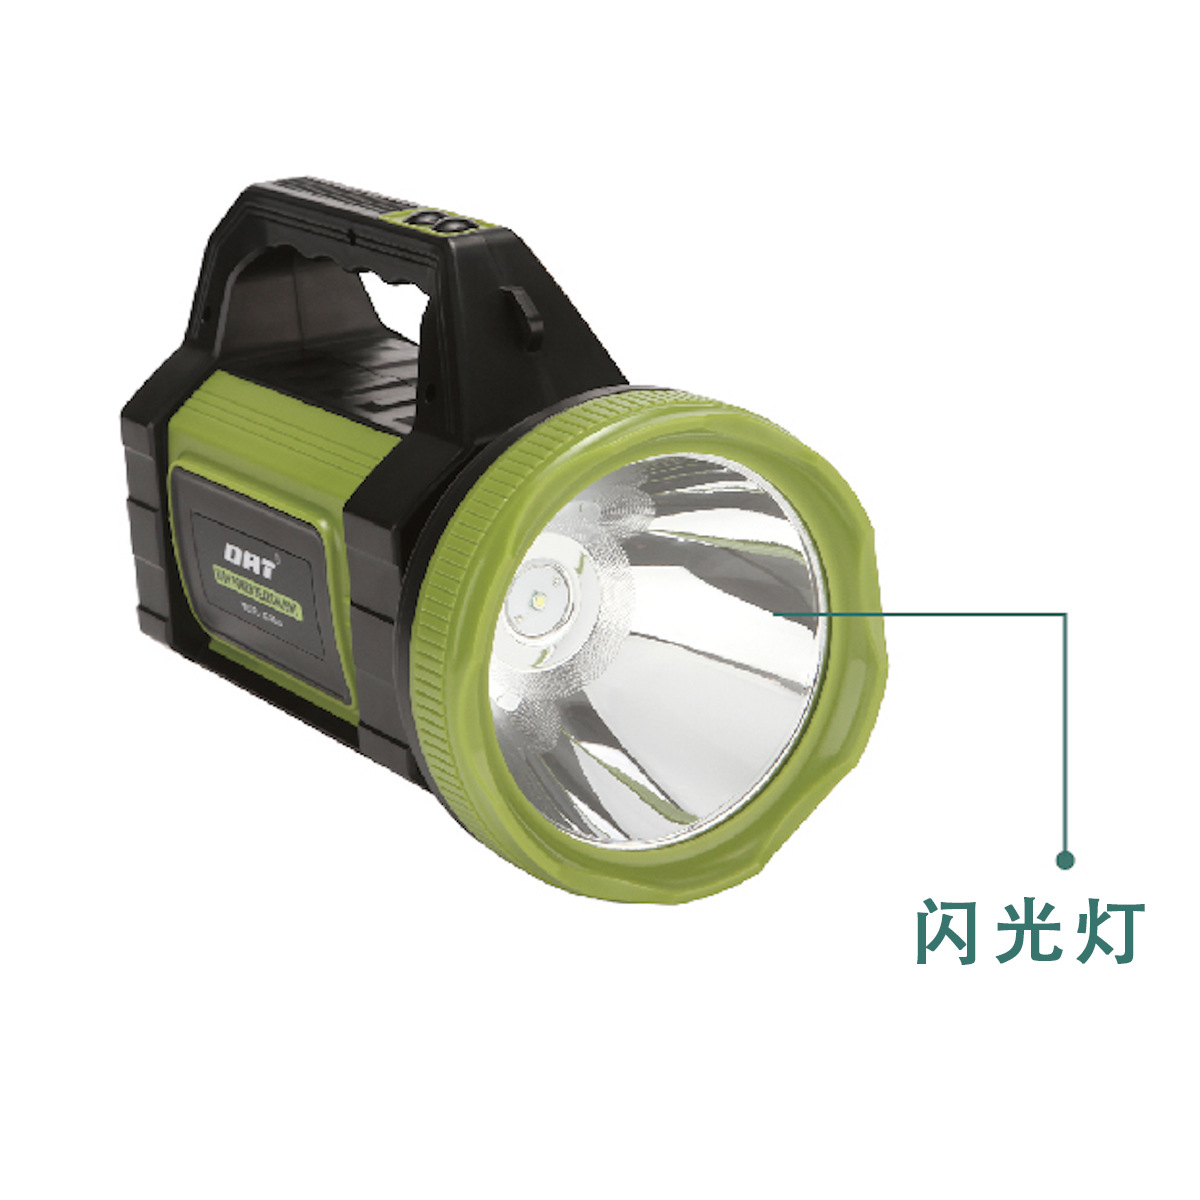 Portable Searchlight Outdoor Led Multi-Function Torch Rechargeable Handheld Emergency Light